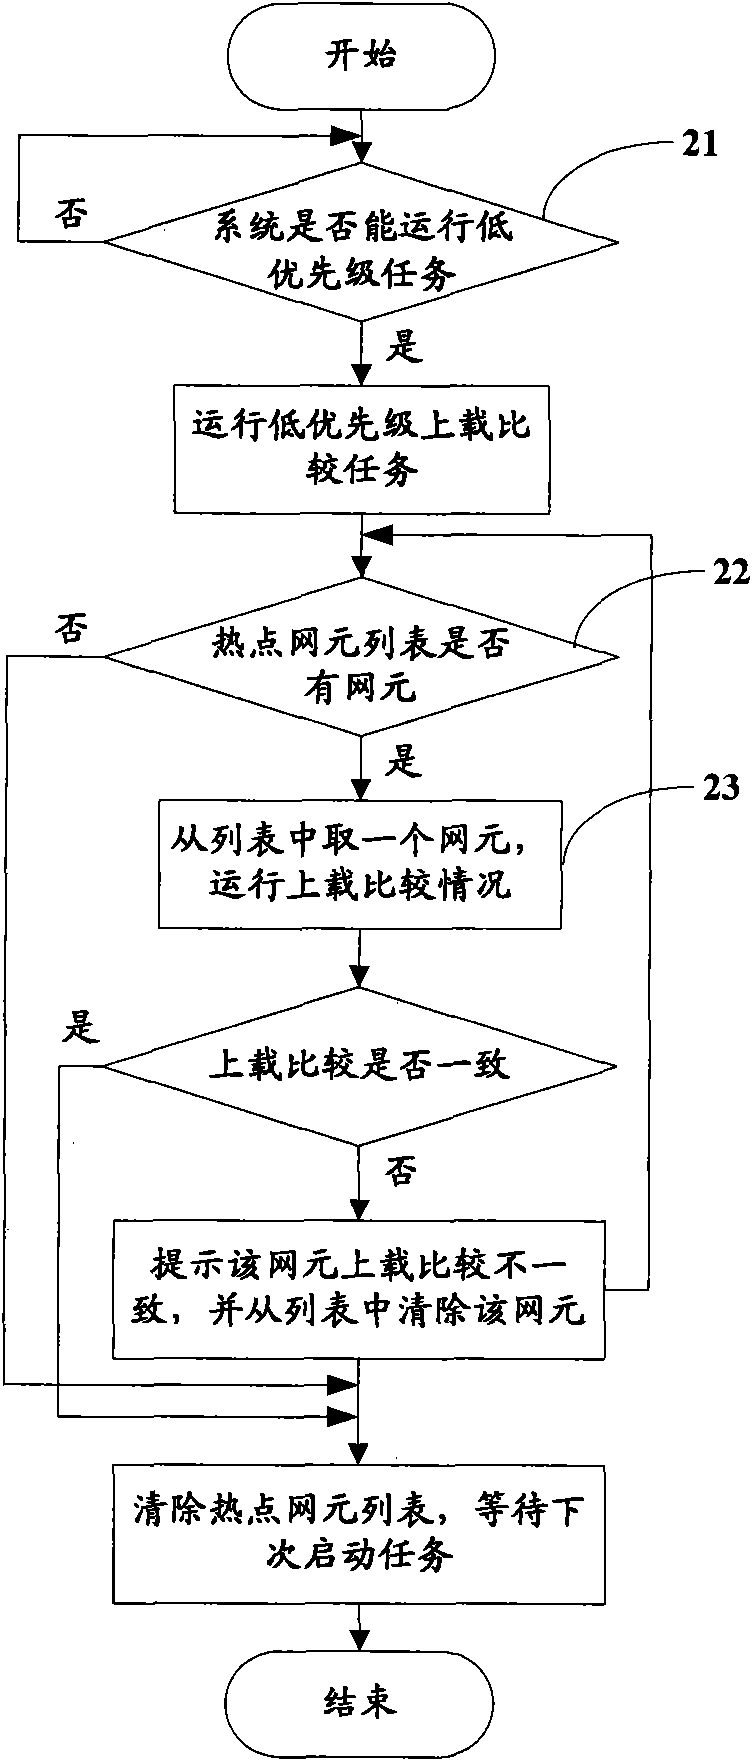 Method for uploading and comparing automatically when telecommunications network management and network element data are not identical